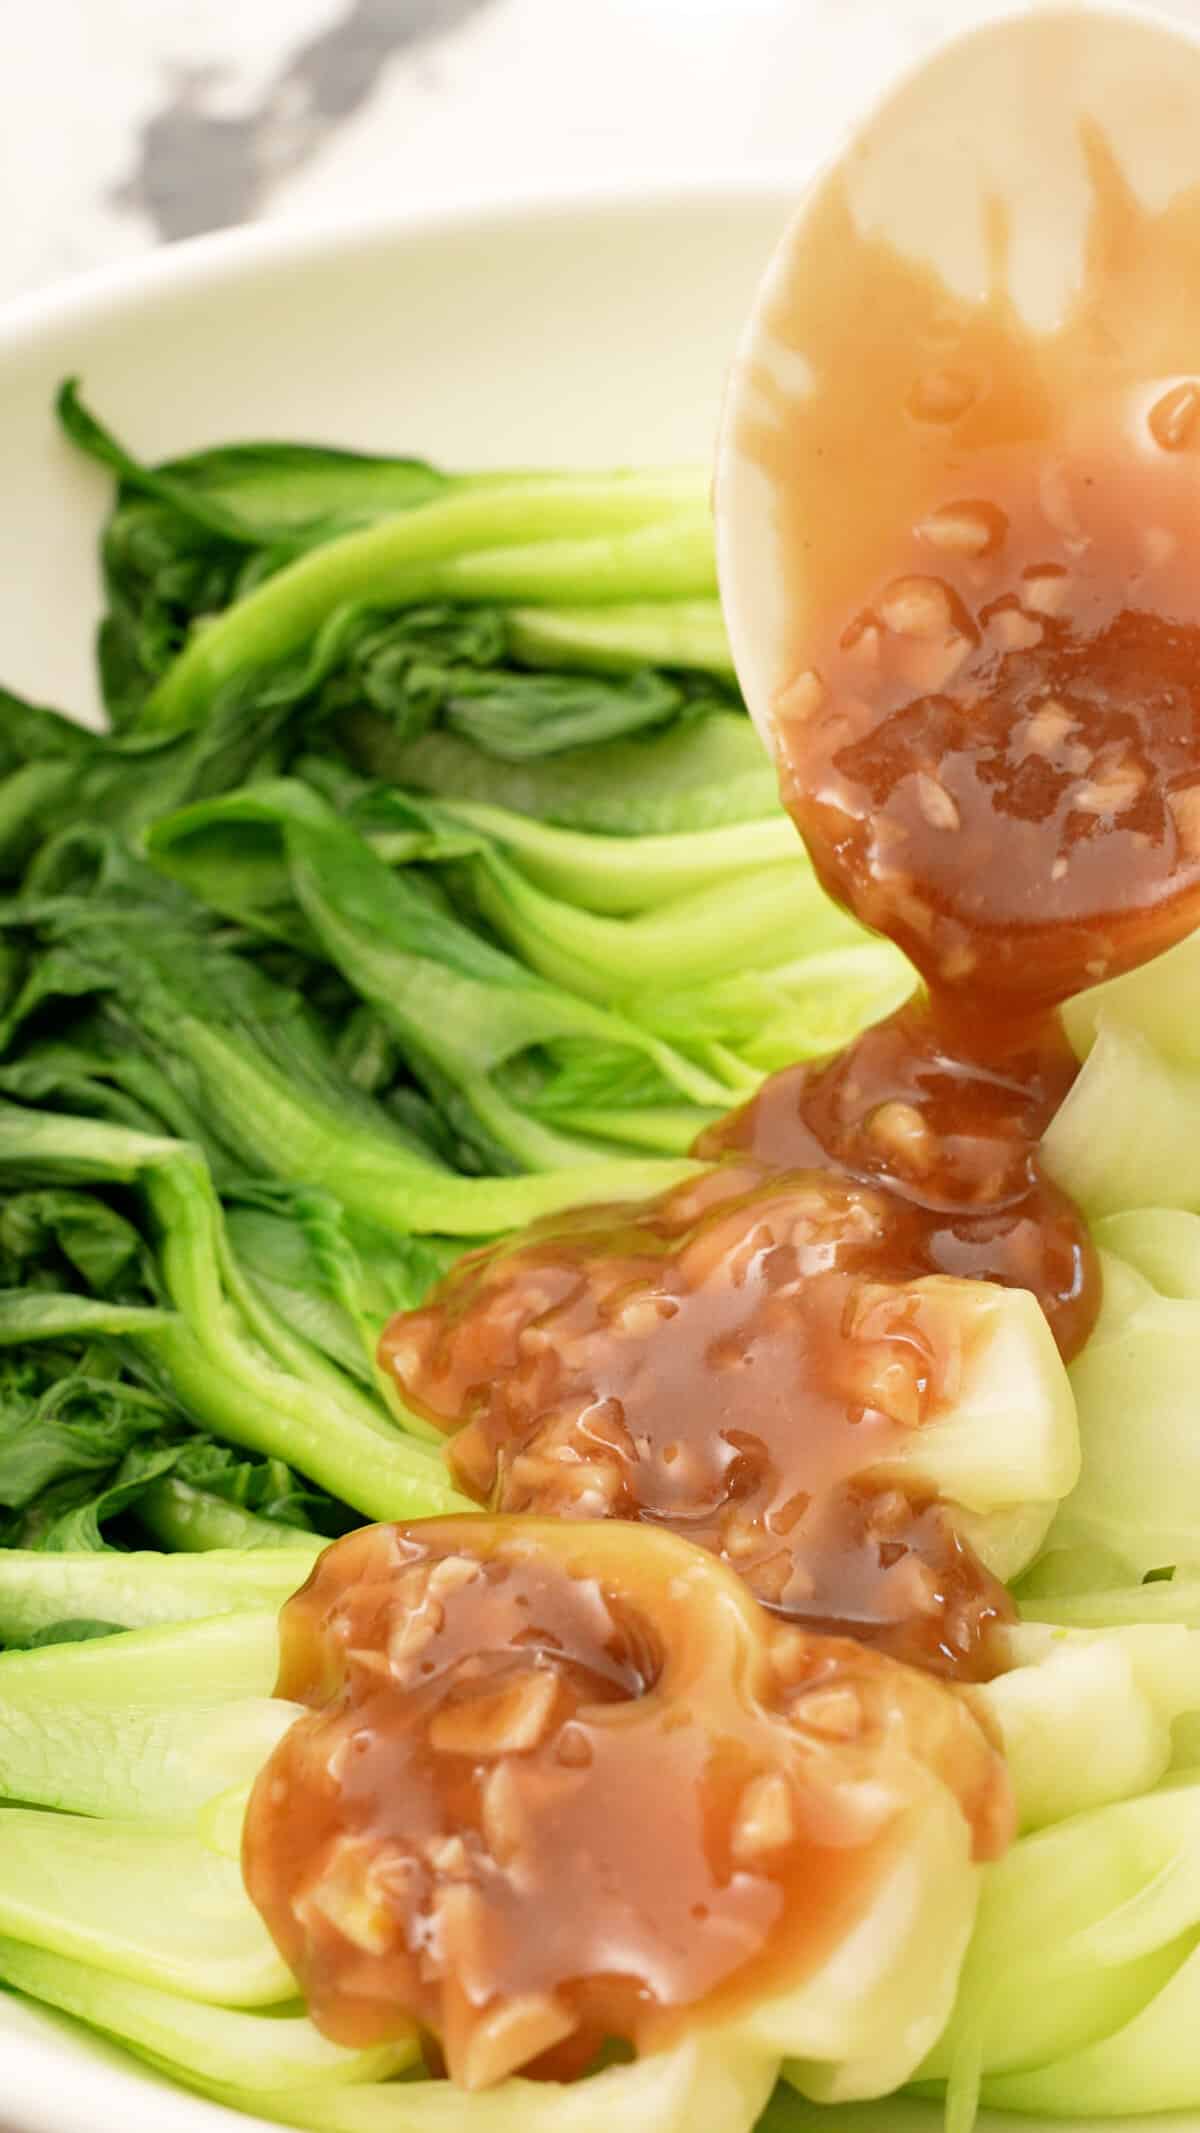 Bok choy with garlic sauce being ladled on top.